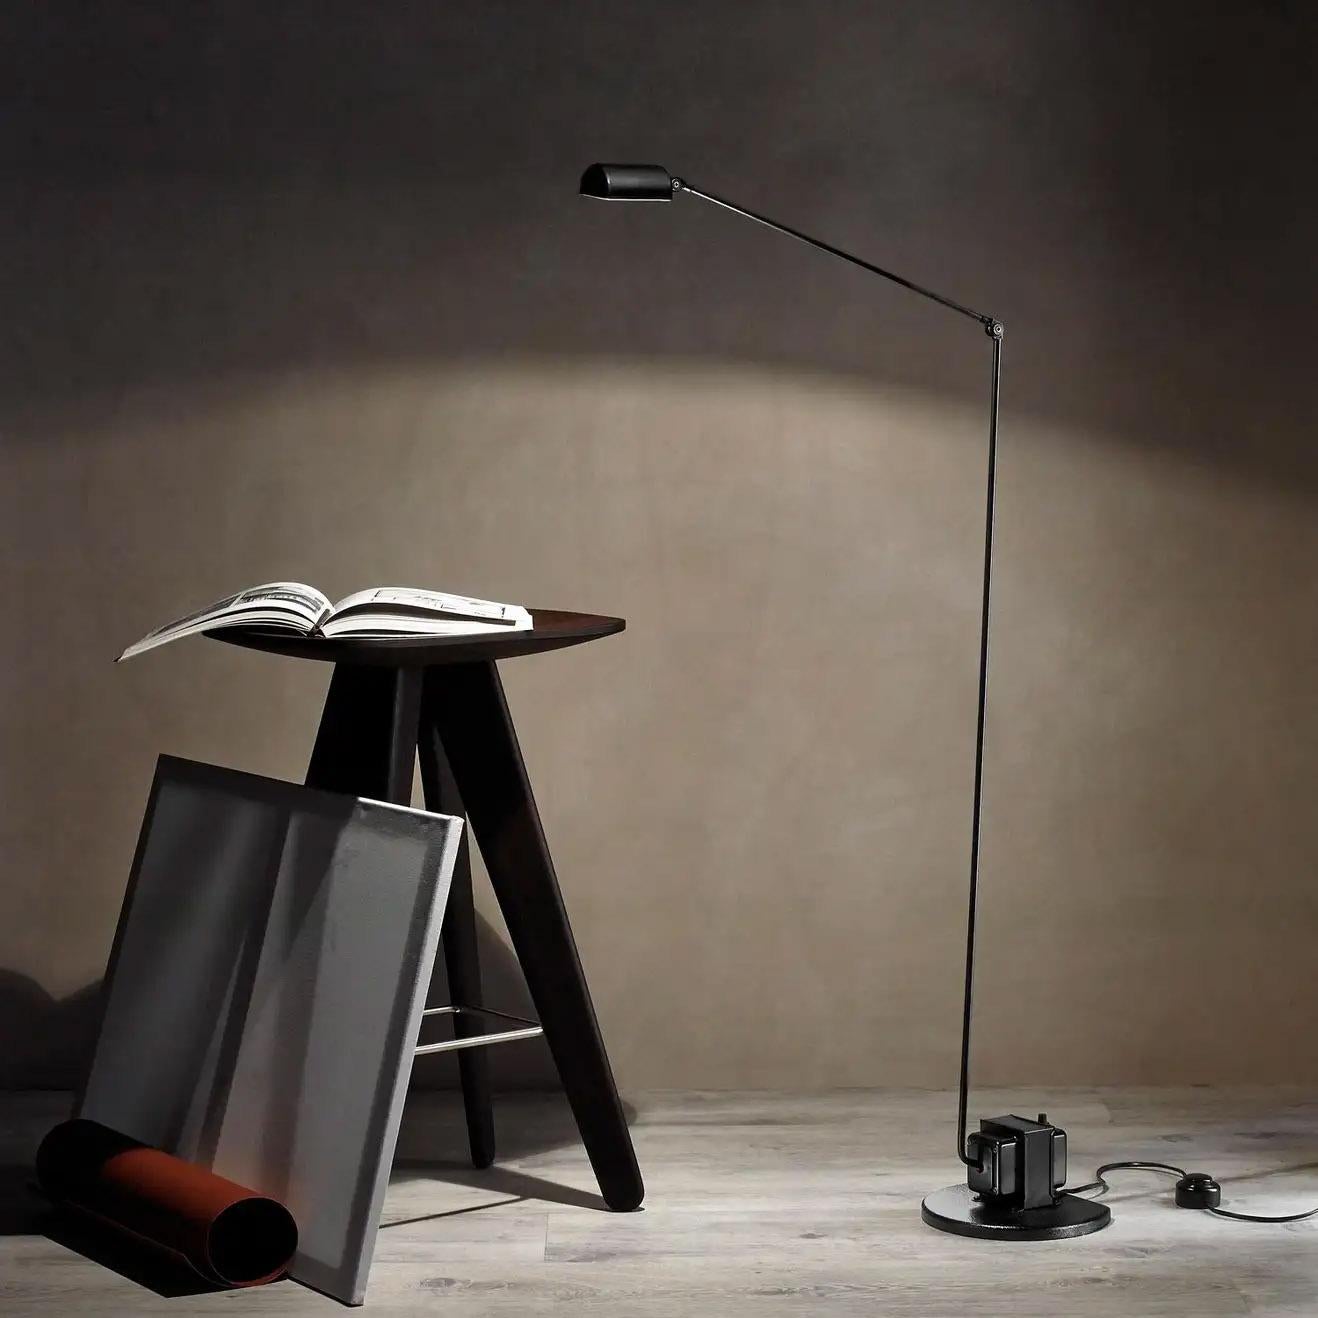 Lumina Daphine Terra LED table lamp in Brushed Nickel by Tommaso Cimini

Undisputed emblem of elegance and functionality, the Daphine represents the essence of Lumina.
The idea behind the creation of the Daphine lamp is as simple as it is